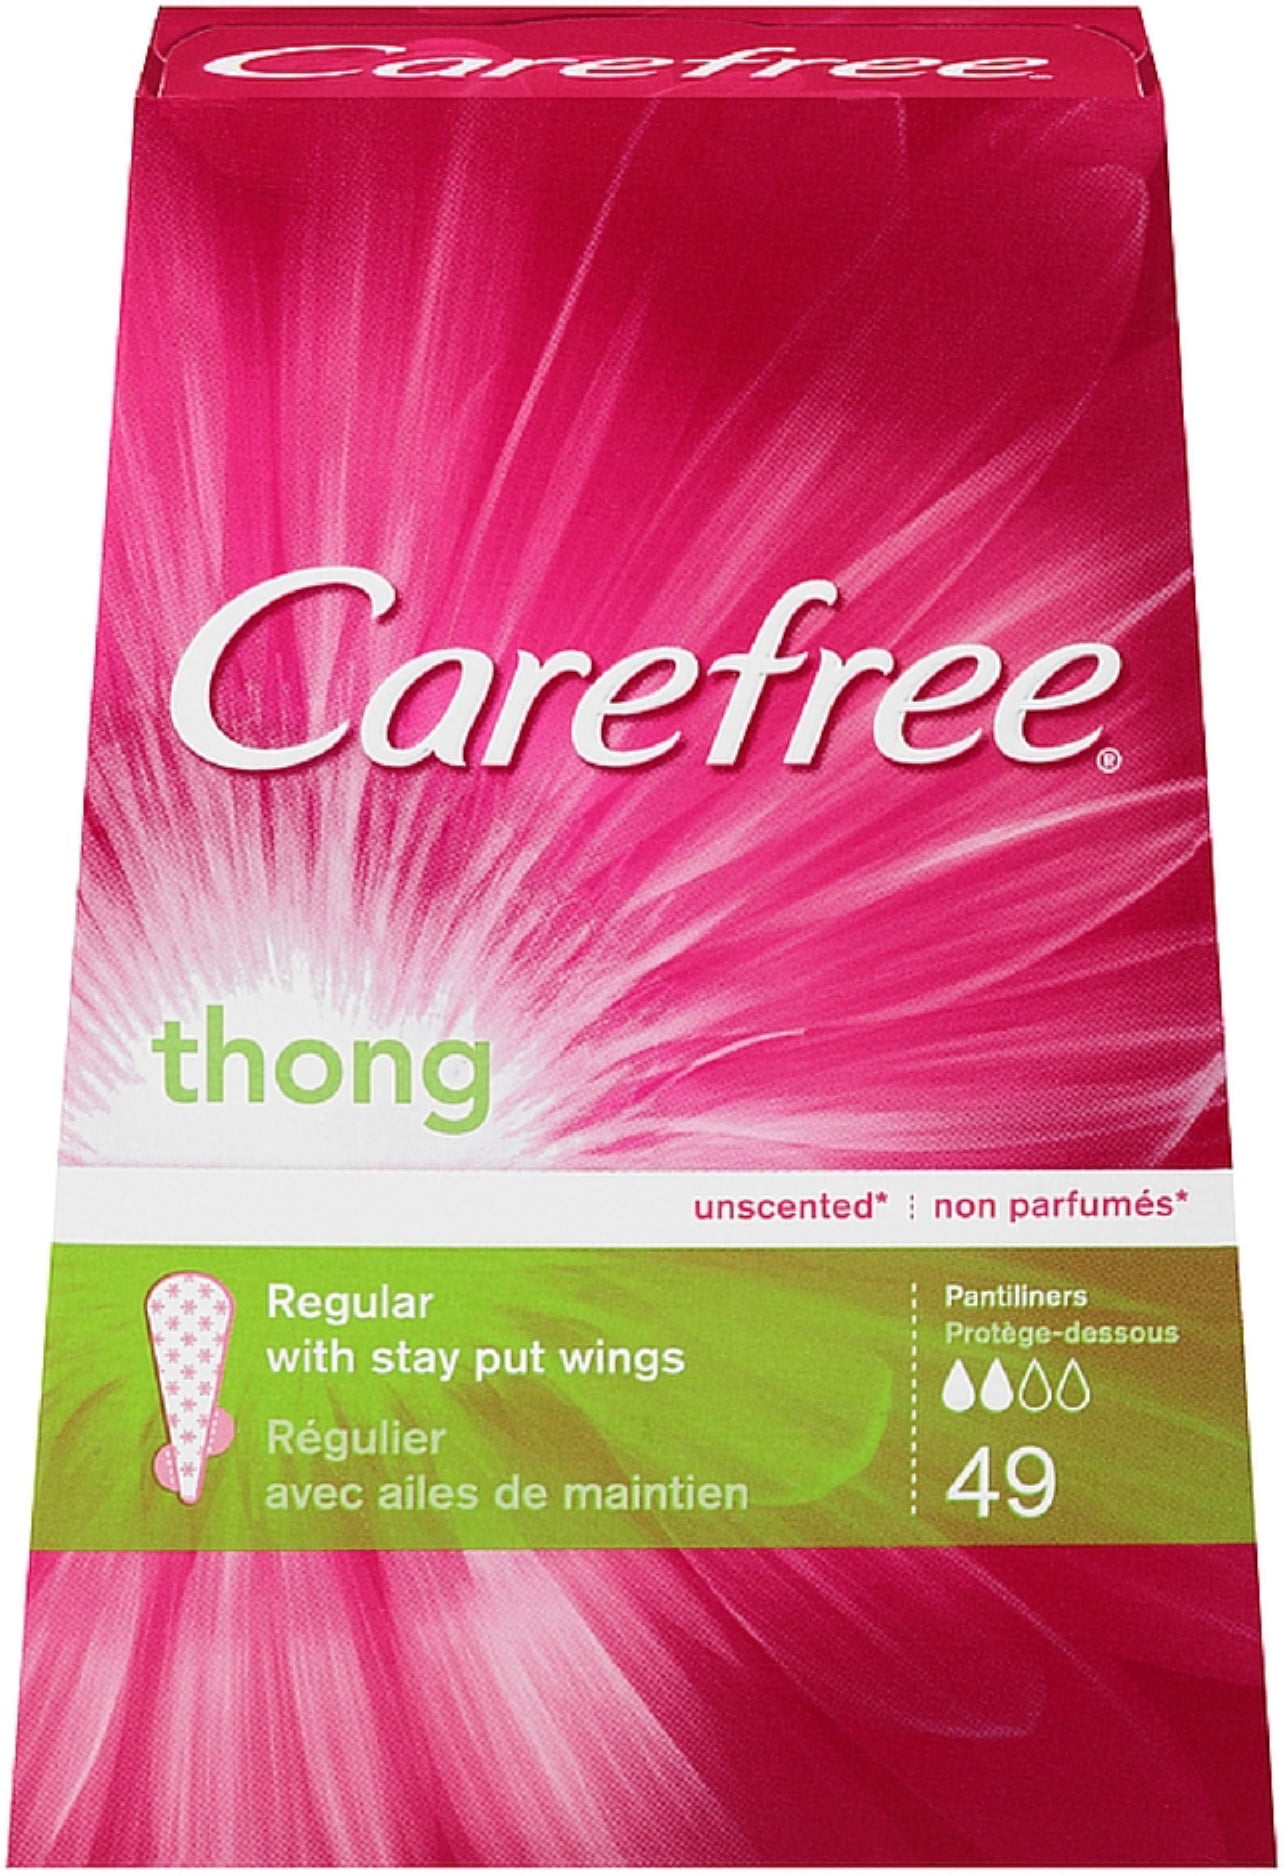 Shop thong pantyliners – Stayfree & Carefree